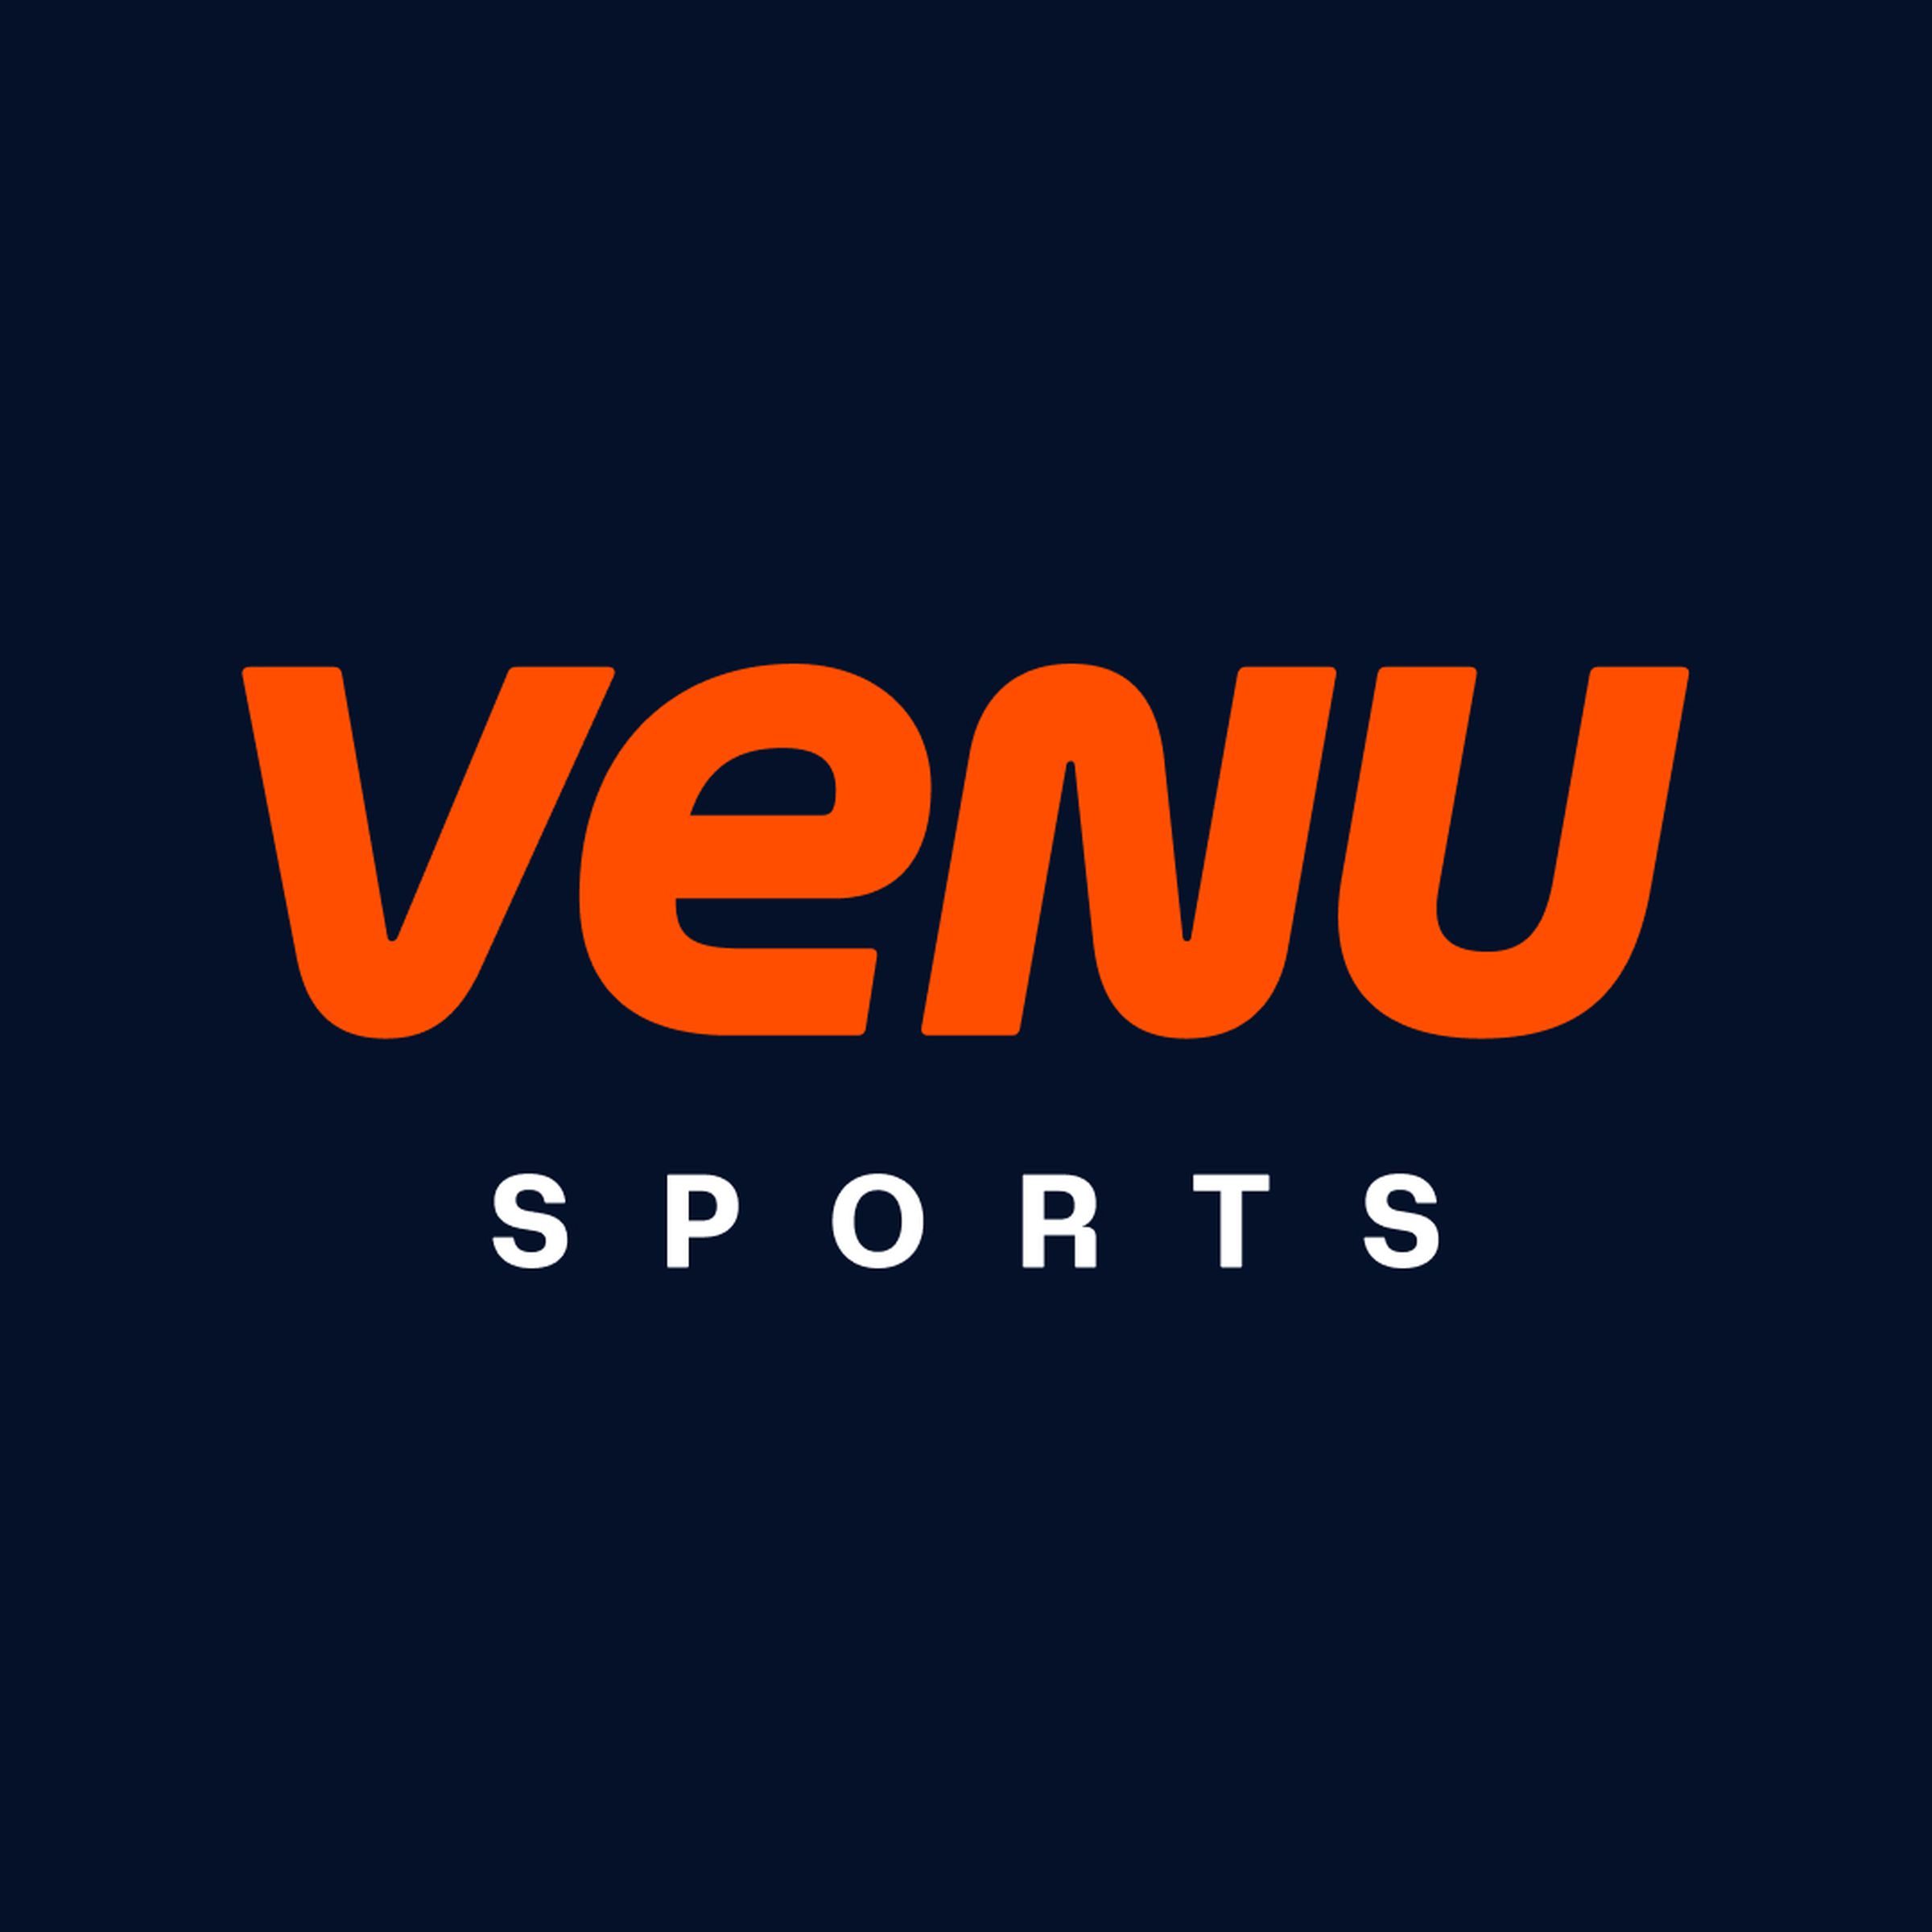 An image showing the new logo of Venu Sports.